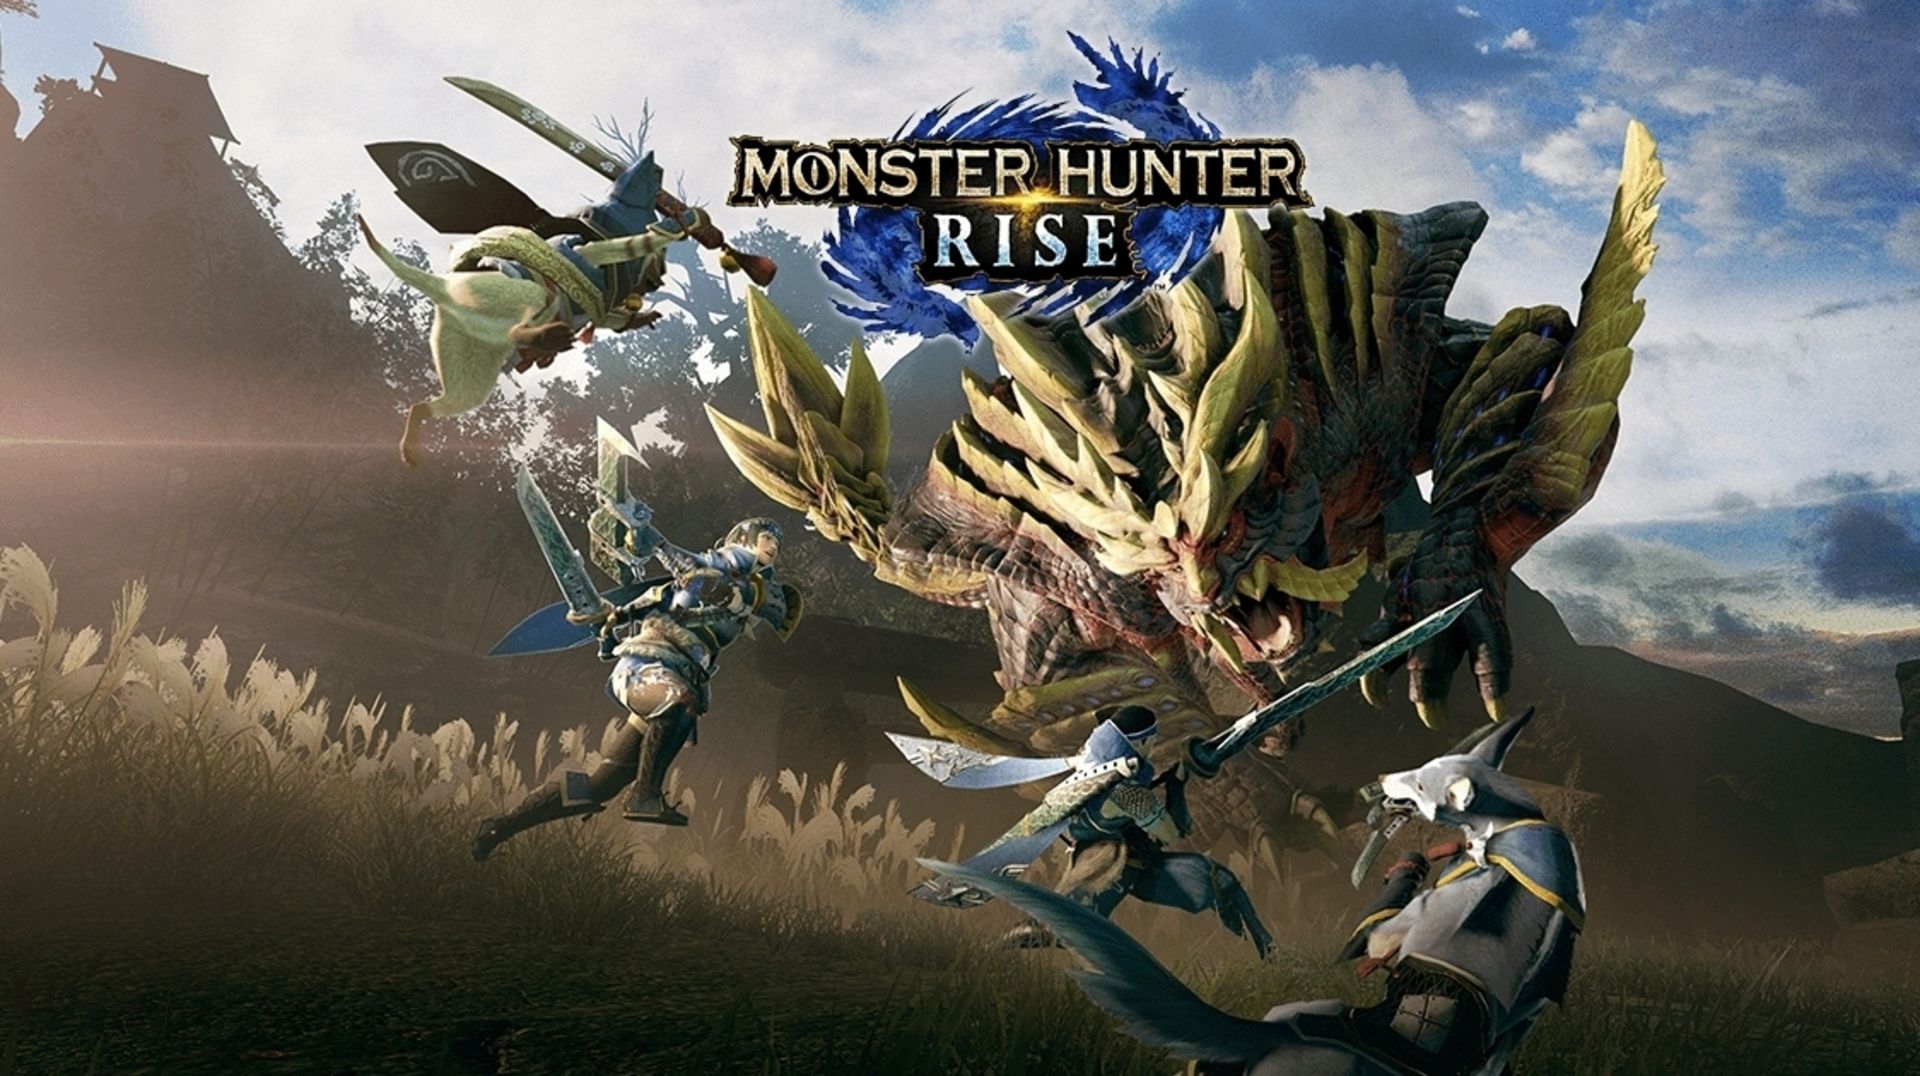 MONSTER HUNTER RISE - Keyboard & Mouse not working – Issue Fix